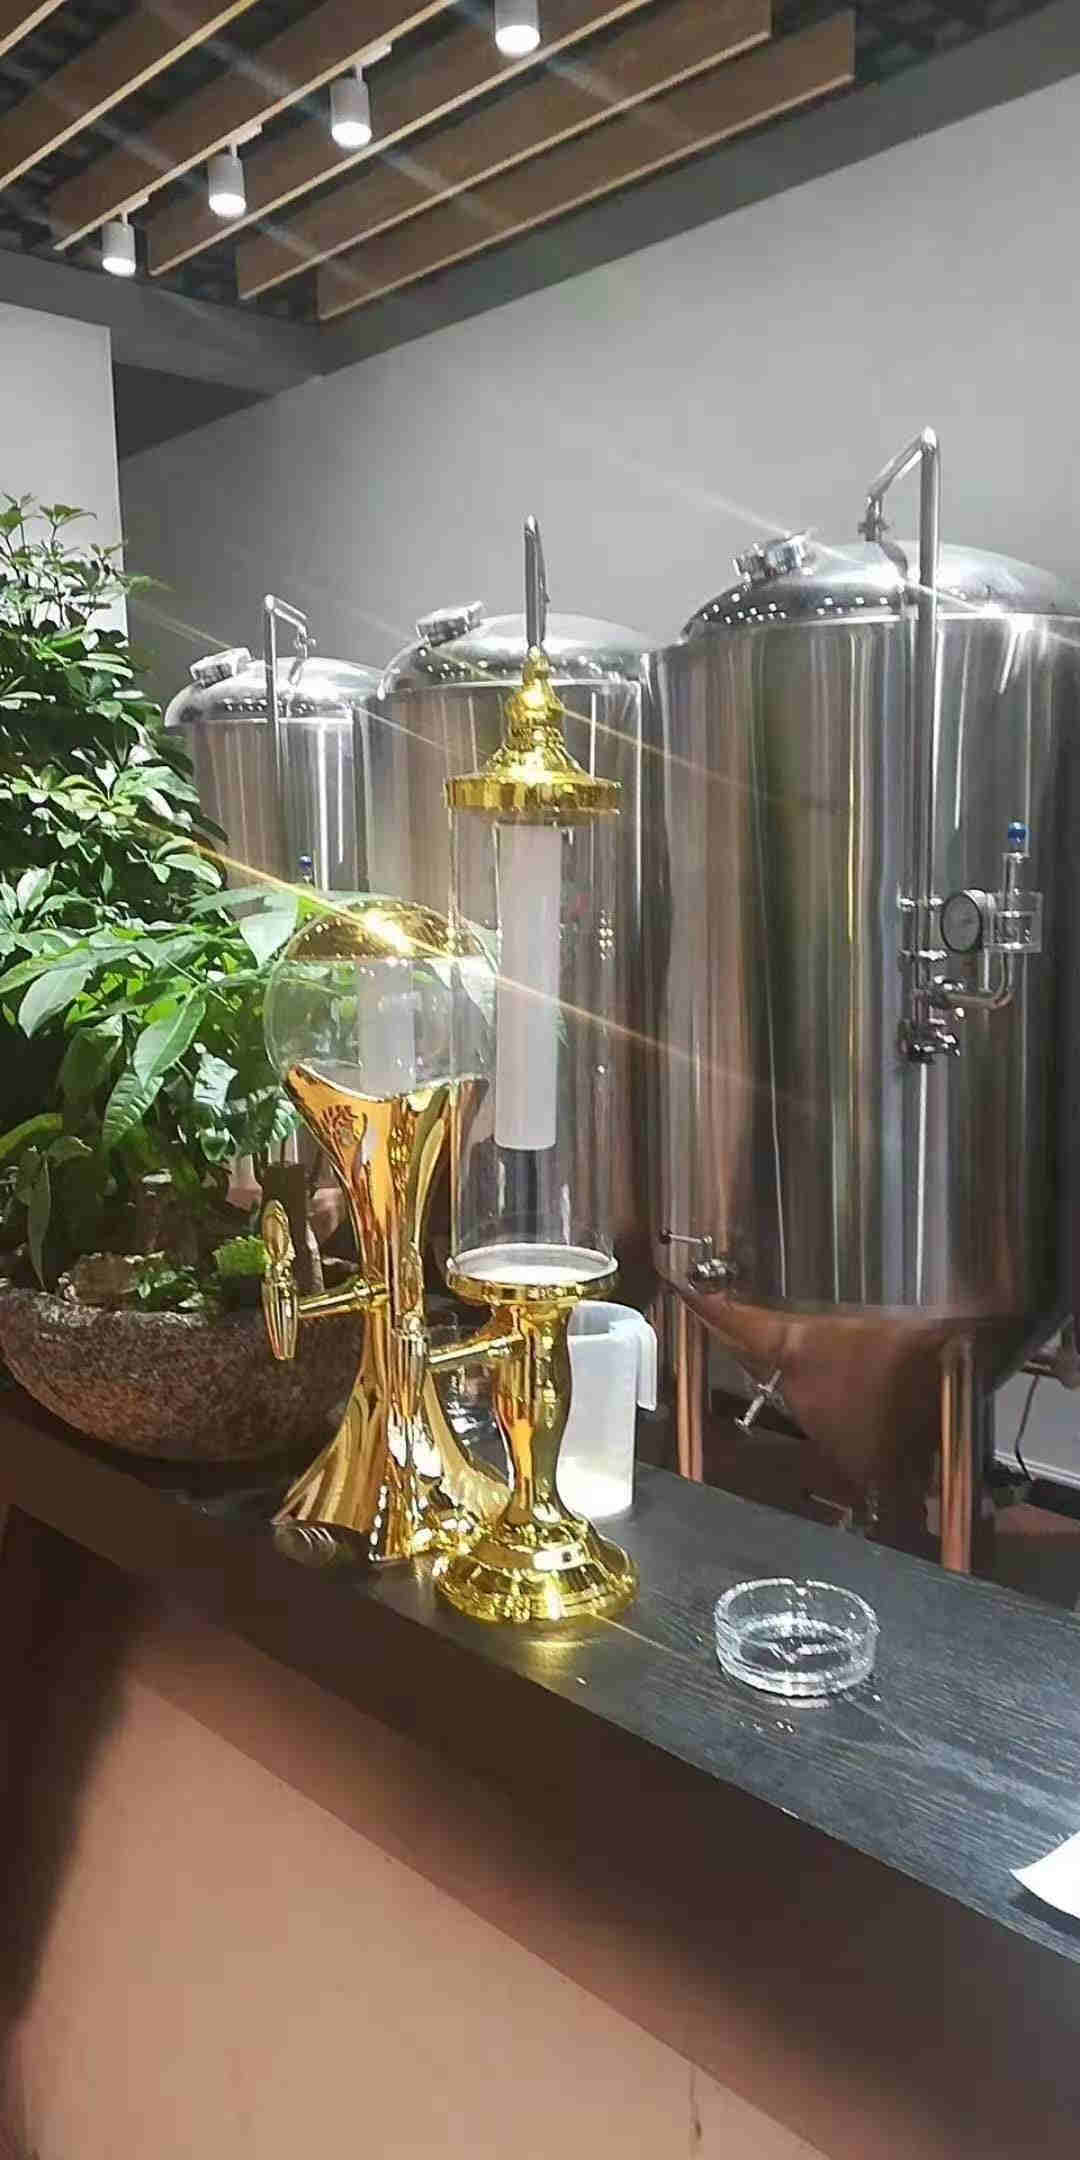 WEMAC -20L50100L1000L2000L- commercial beer brewing system -for bars and beer houses_副本.jpg